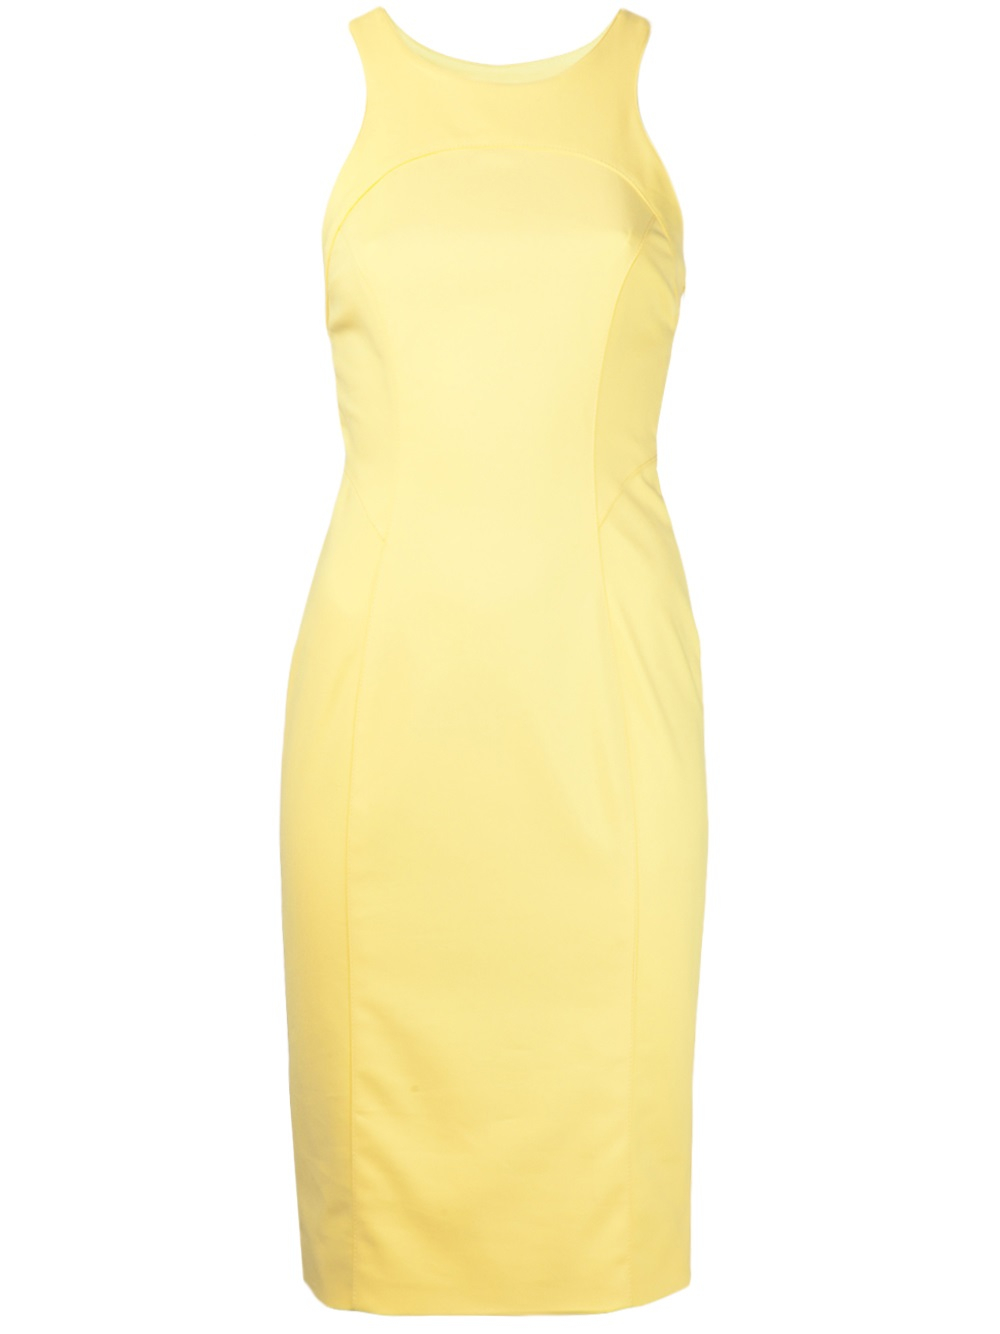 Lyst - Veronica Beard Fitted Dress in Yellow